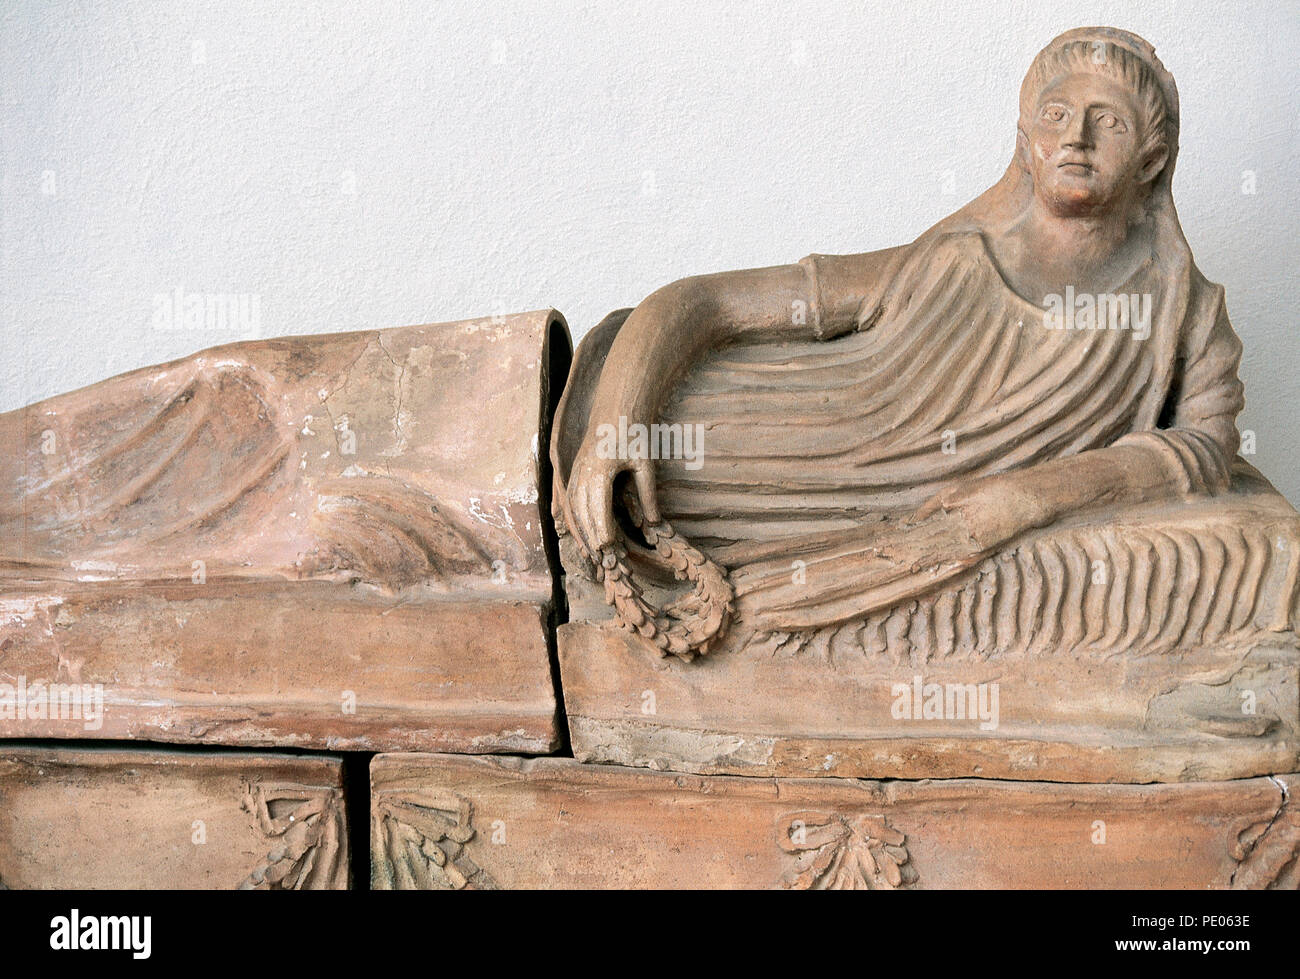 Etruscan sarcophagus depicting a female deceased reclining carrying a laurel wreath on her hand. 4th-3rd century BC. Vitelleschi Palace. National Archaeological Museum of Tarquinia. Italy. Stock Photo